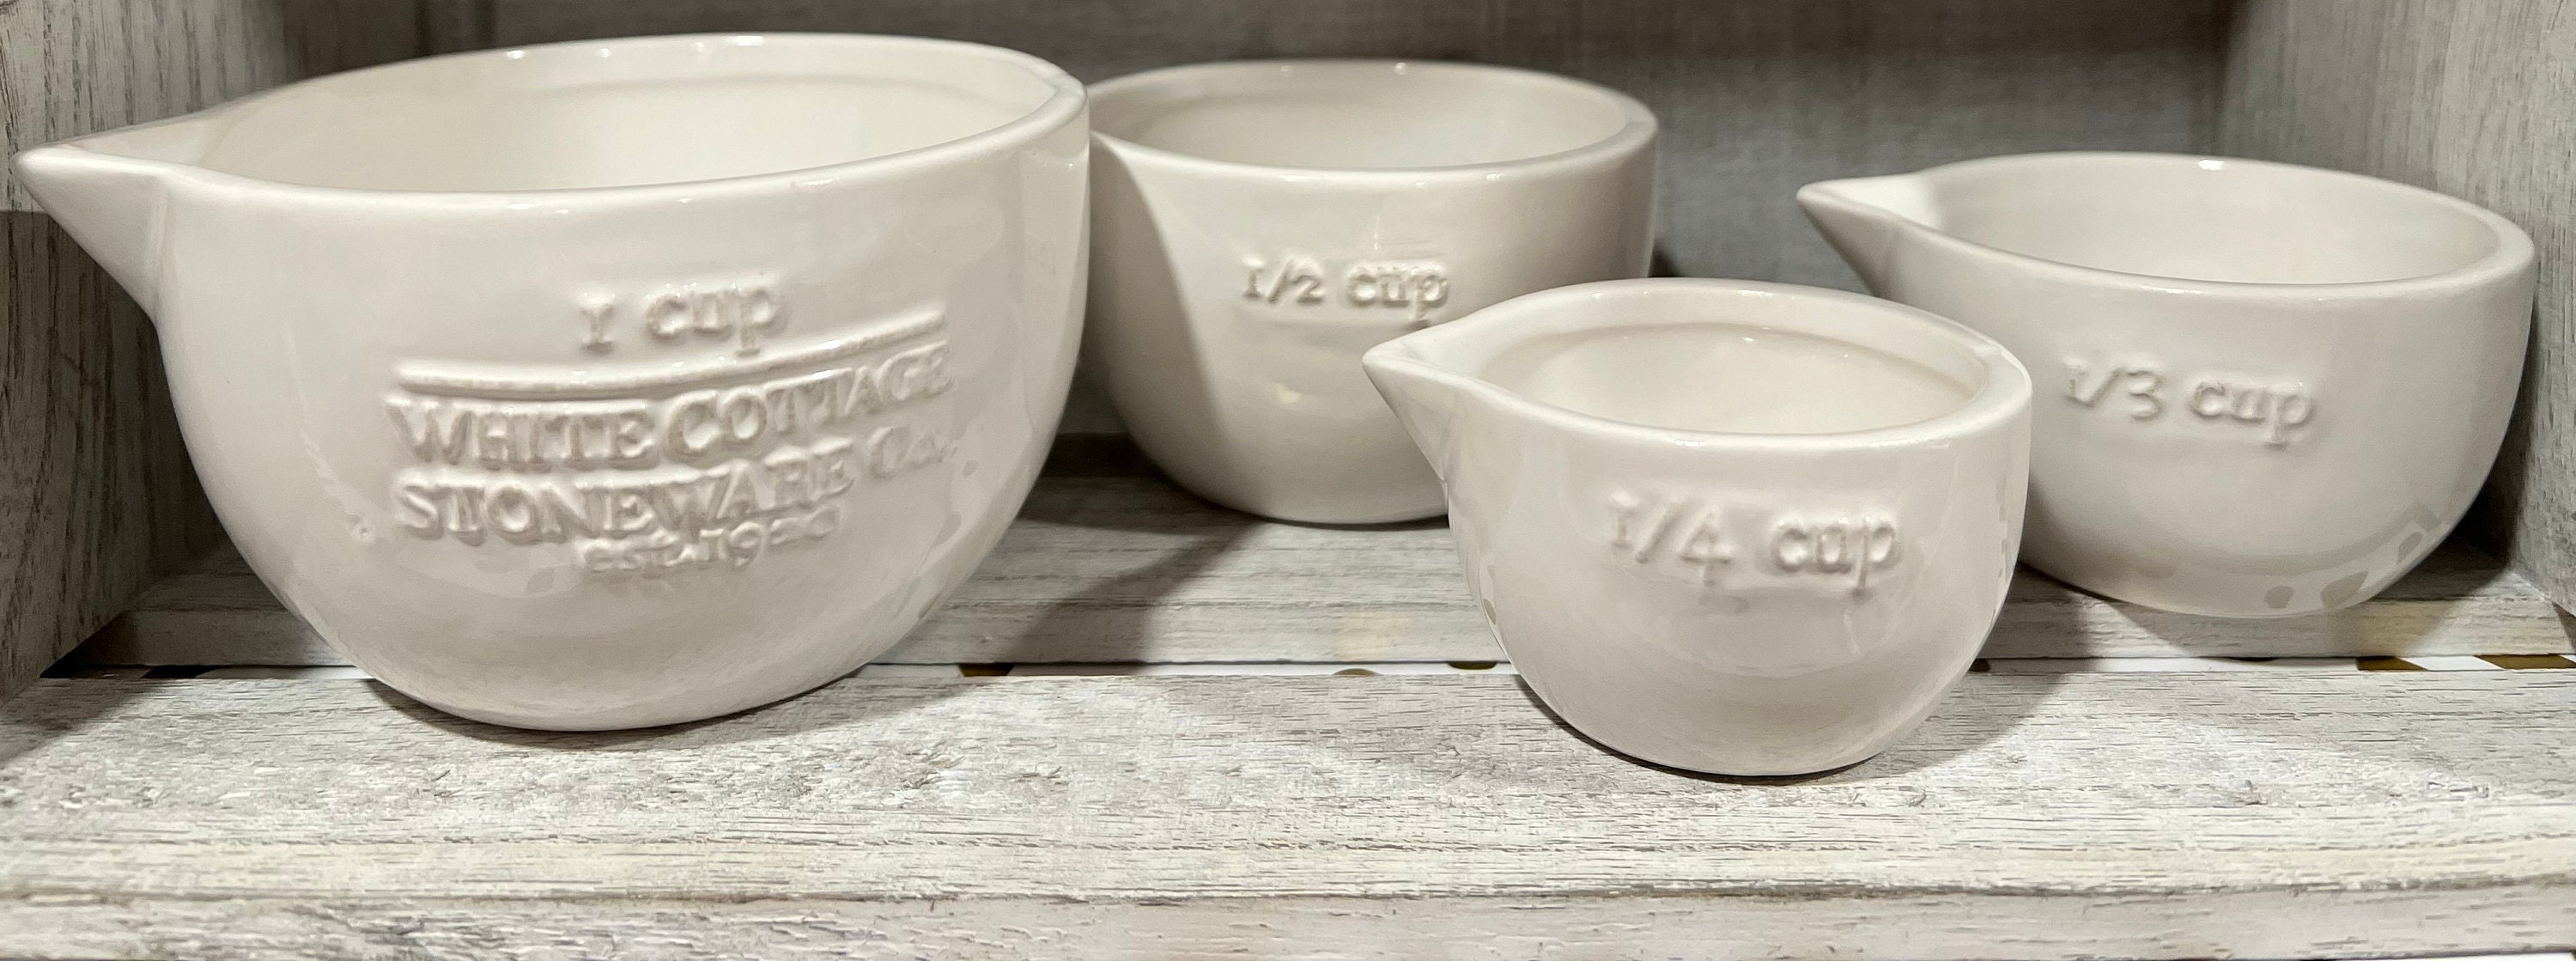 Murchison-hume Ceramic Measuring Cup